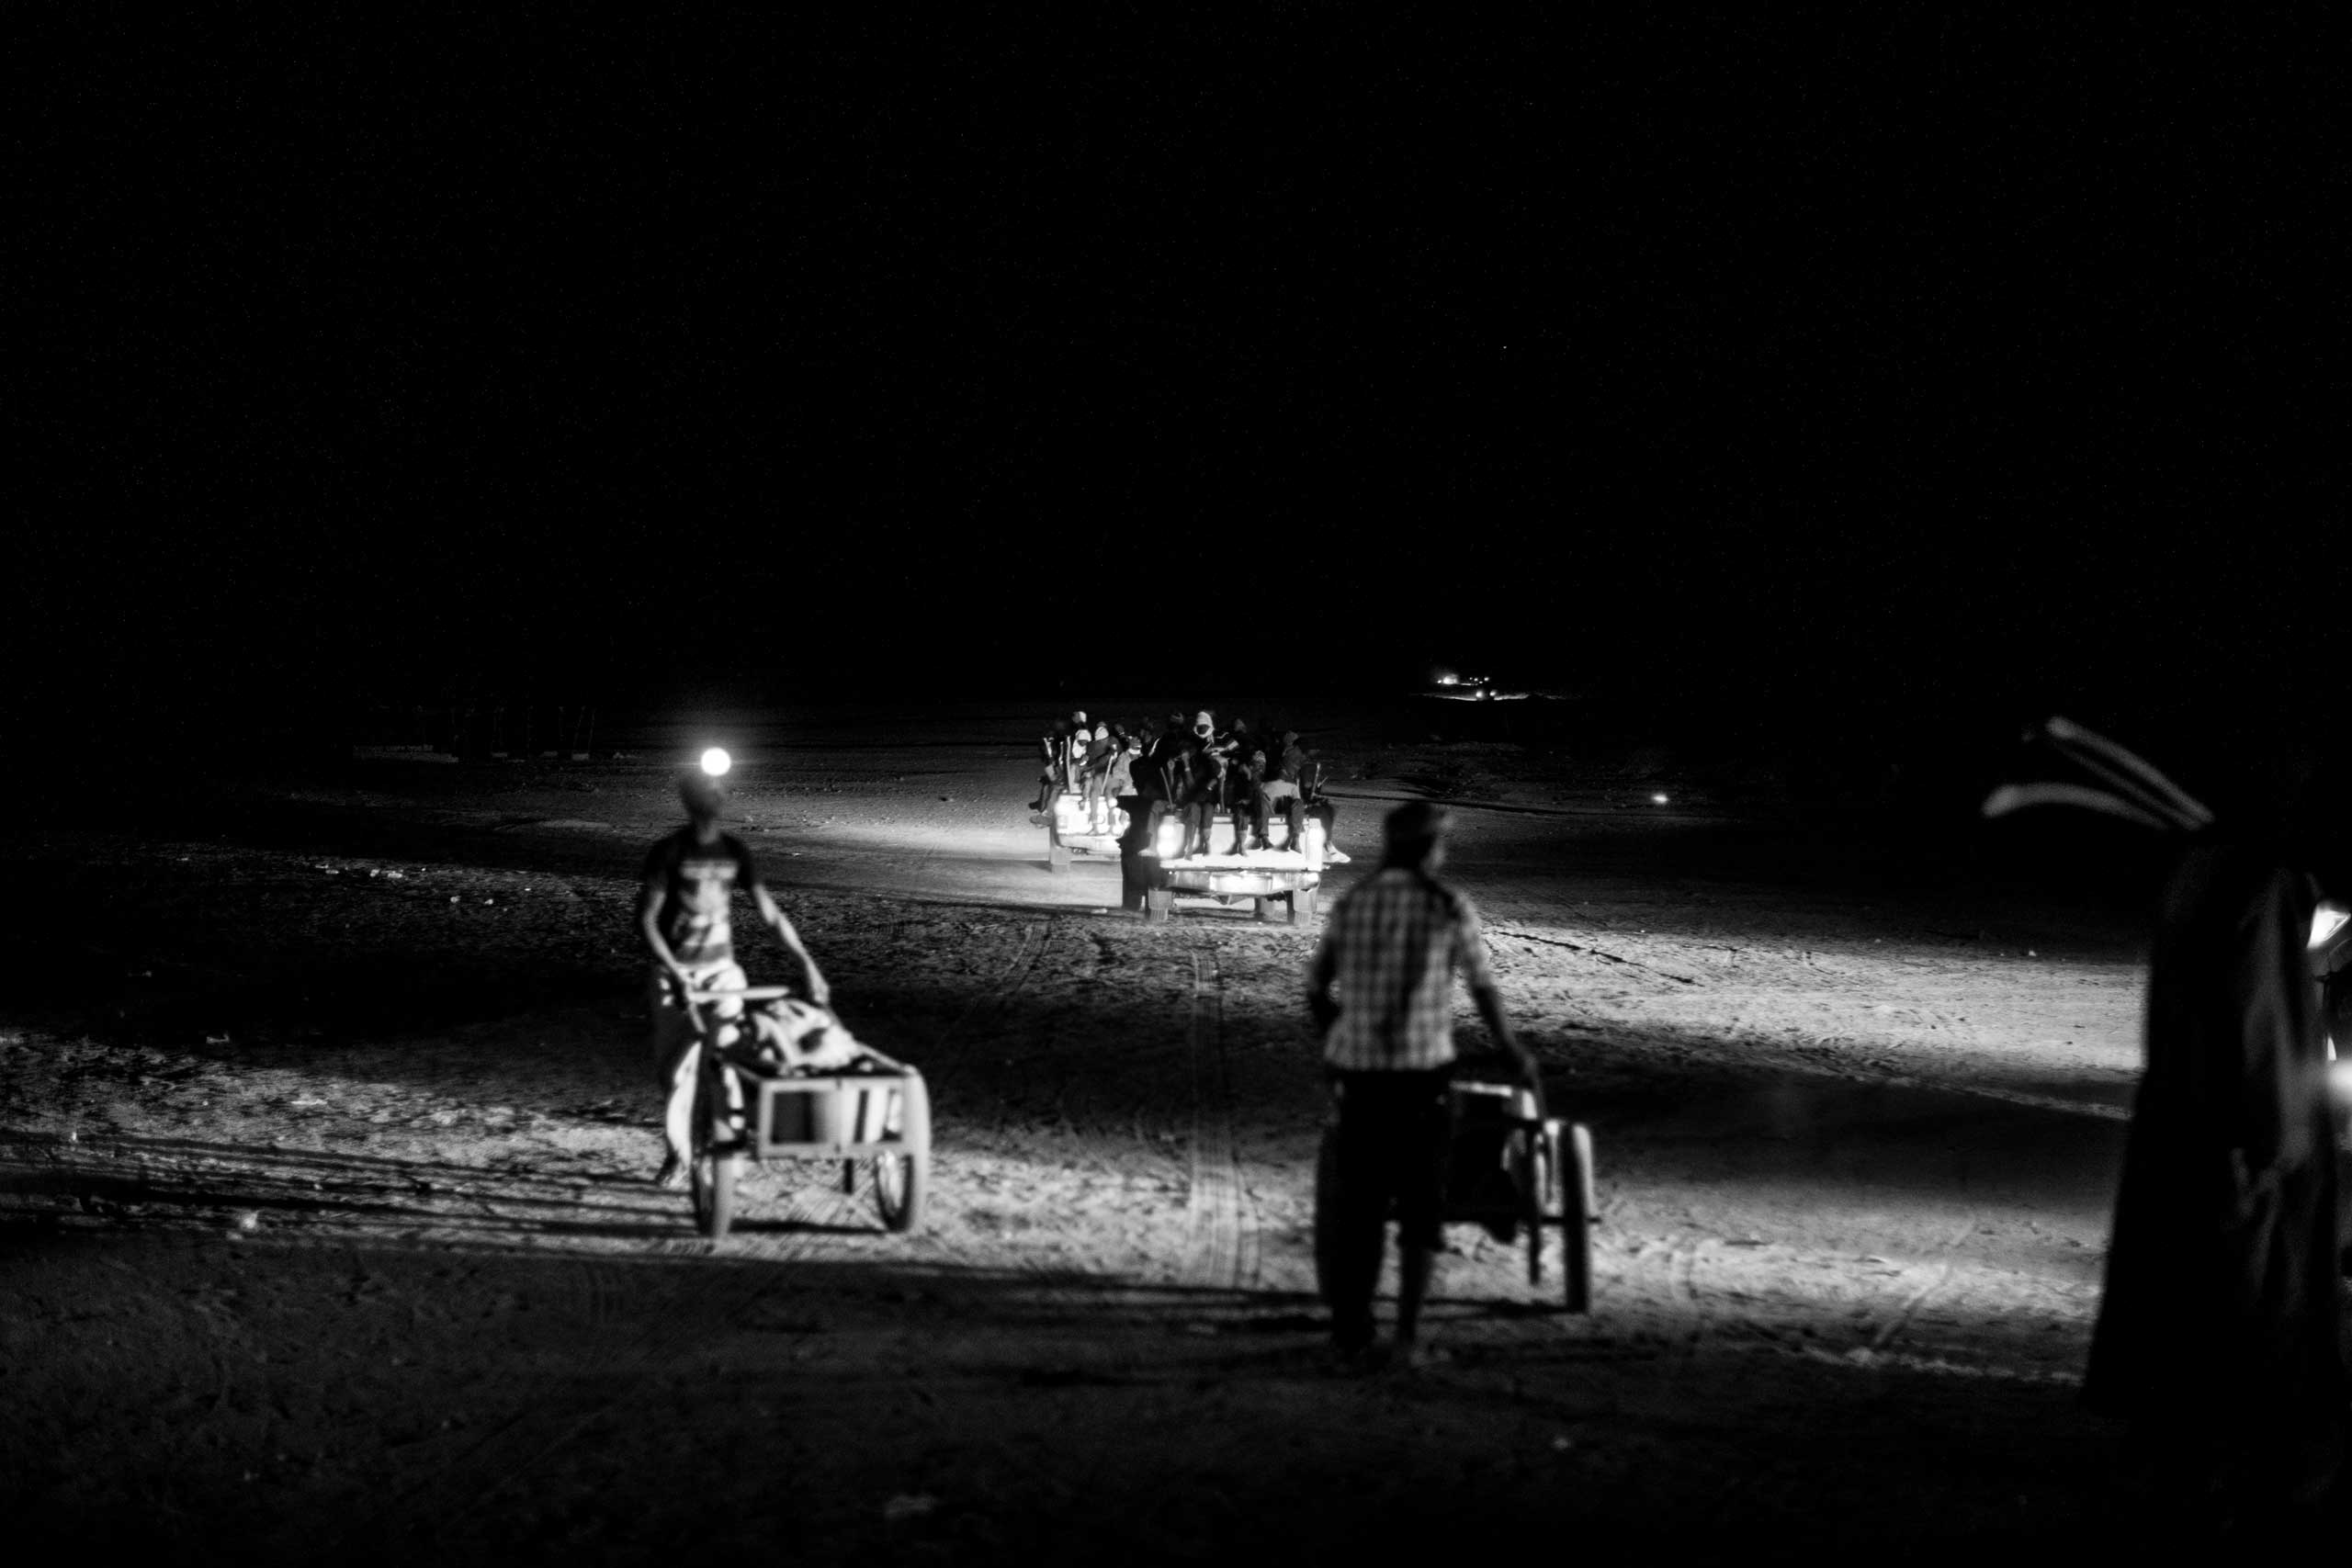 Trucks carrying migrants pass back into the desert as vendors push their carts back to wait for more trucks at a small desert outpost a few hours north of Agadez. Smugglers time their departure into the desert to within a few hours, forming a loose caravan in the hopes that it will provide some shred of security against the increasingly lawless Sahara.